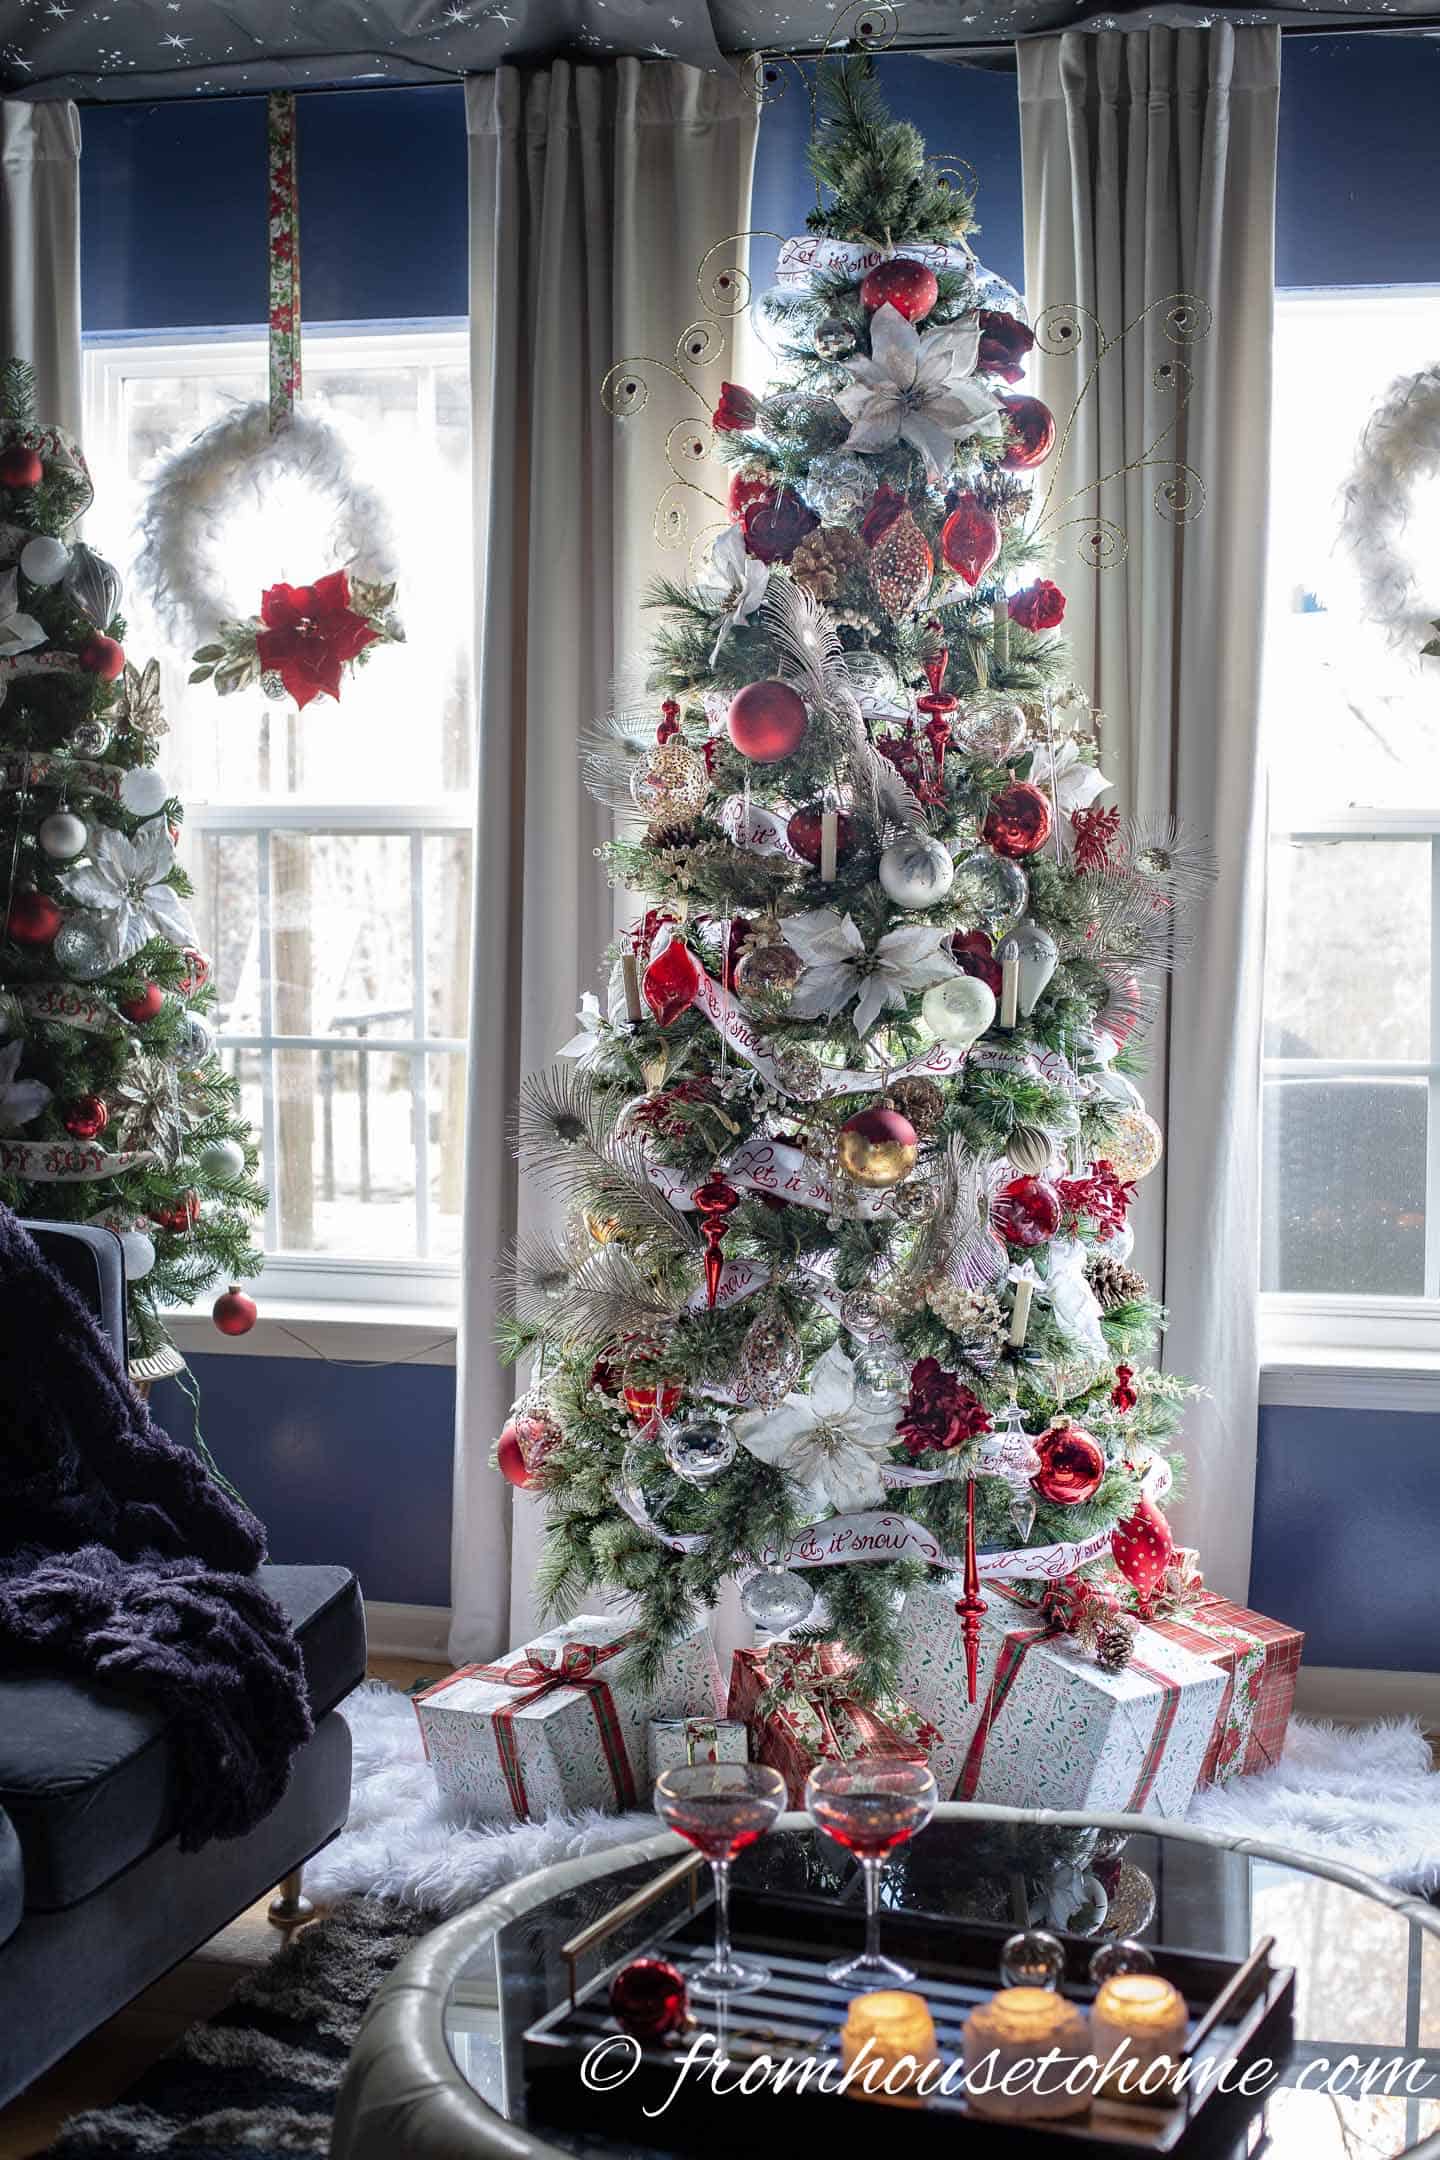 Christmas tree in front of windows with white, red and gold wreaths hanging in them